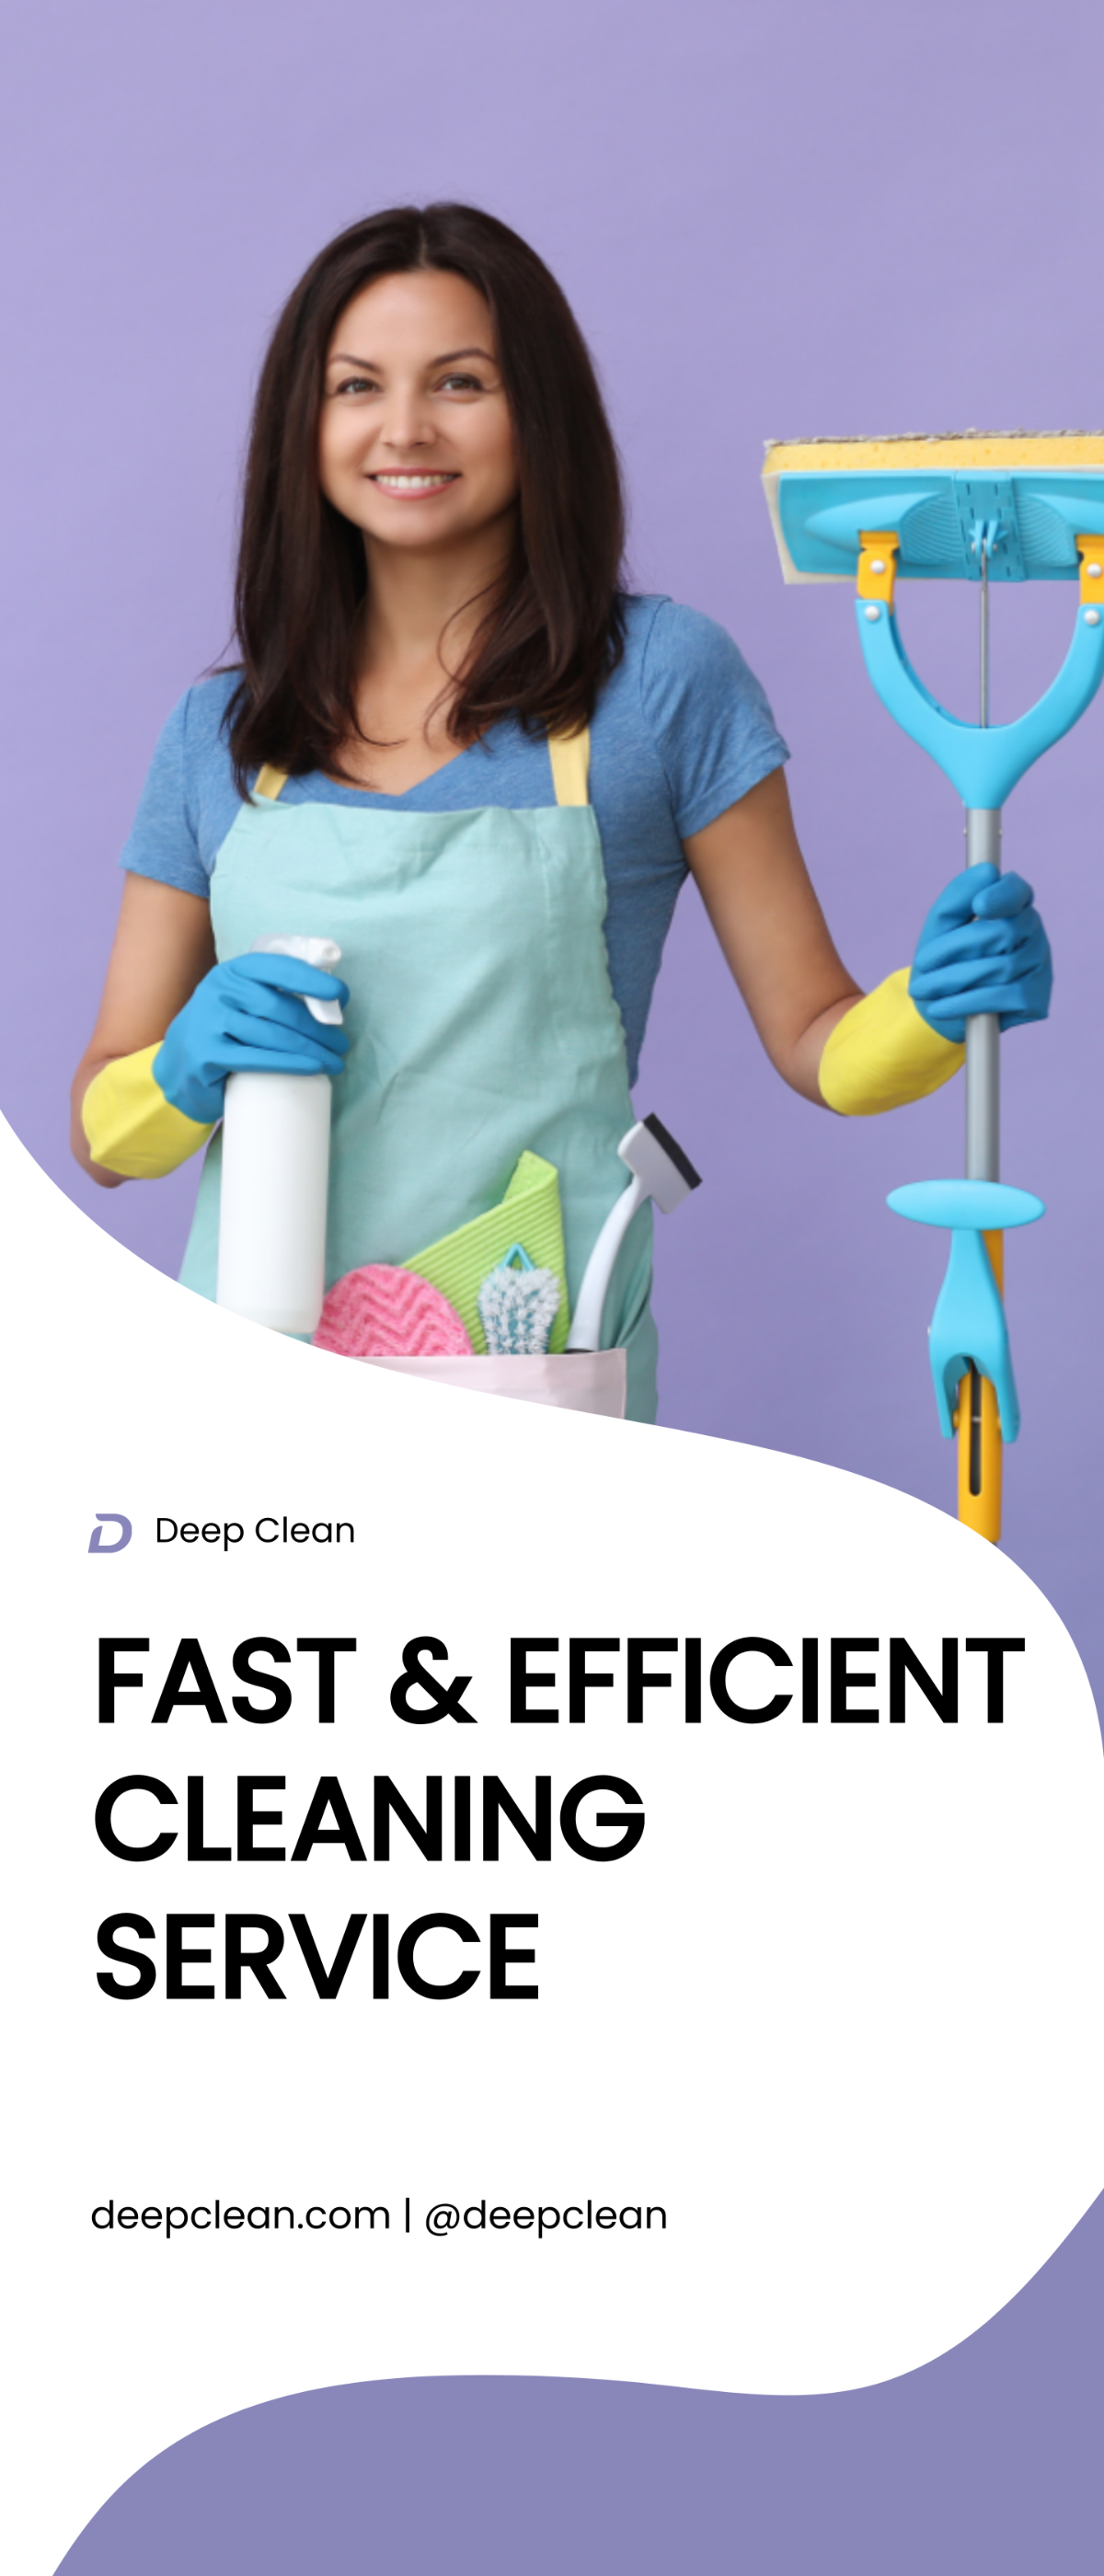 Elegant Cleaning Services Rollup Banner Template